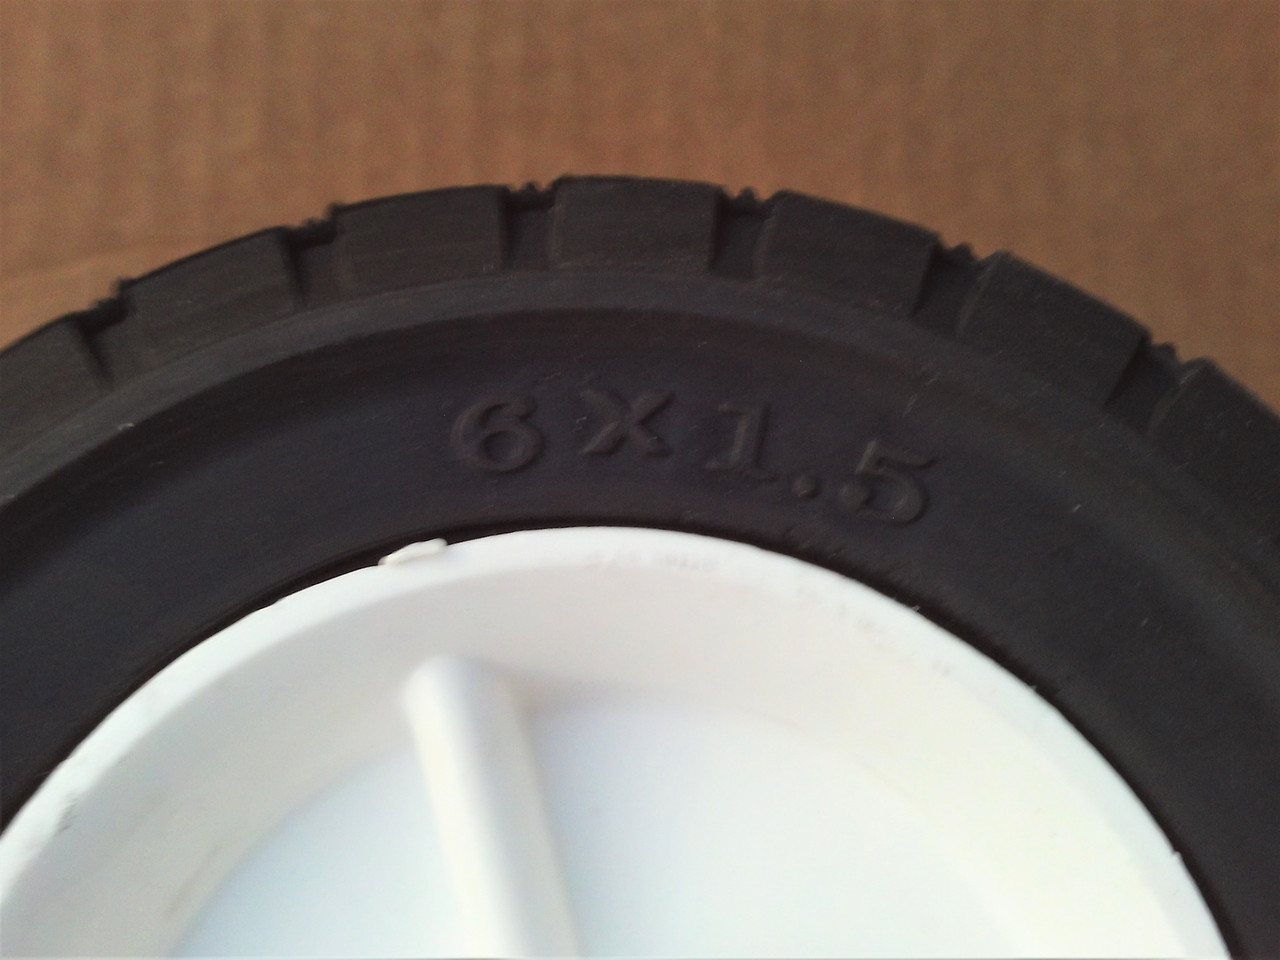 Lawn Mower Wheel for AYP, Craftsman 583783601, STD333760, 6" tall, 1-1/2" Wide, Center hole 1/2"